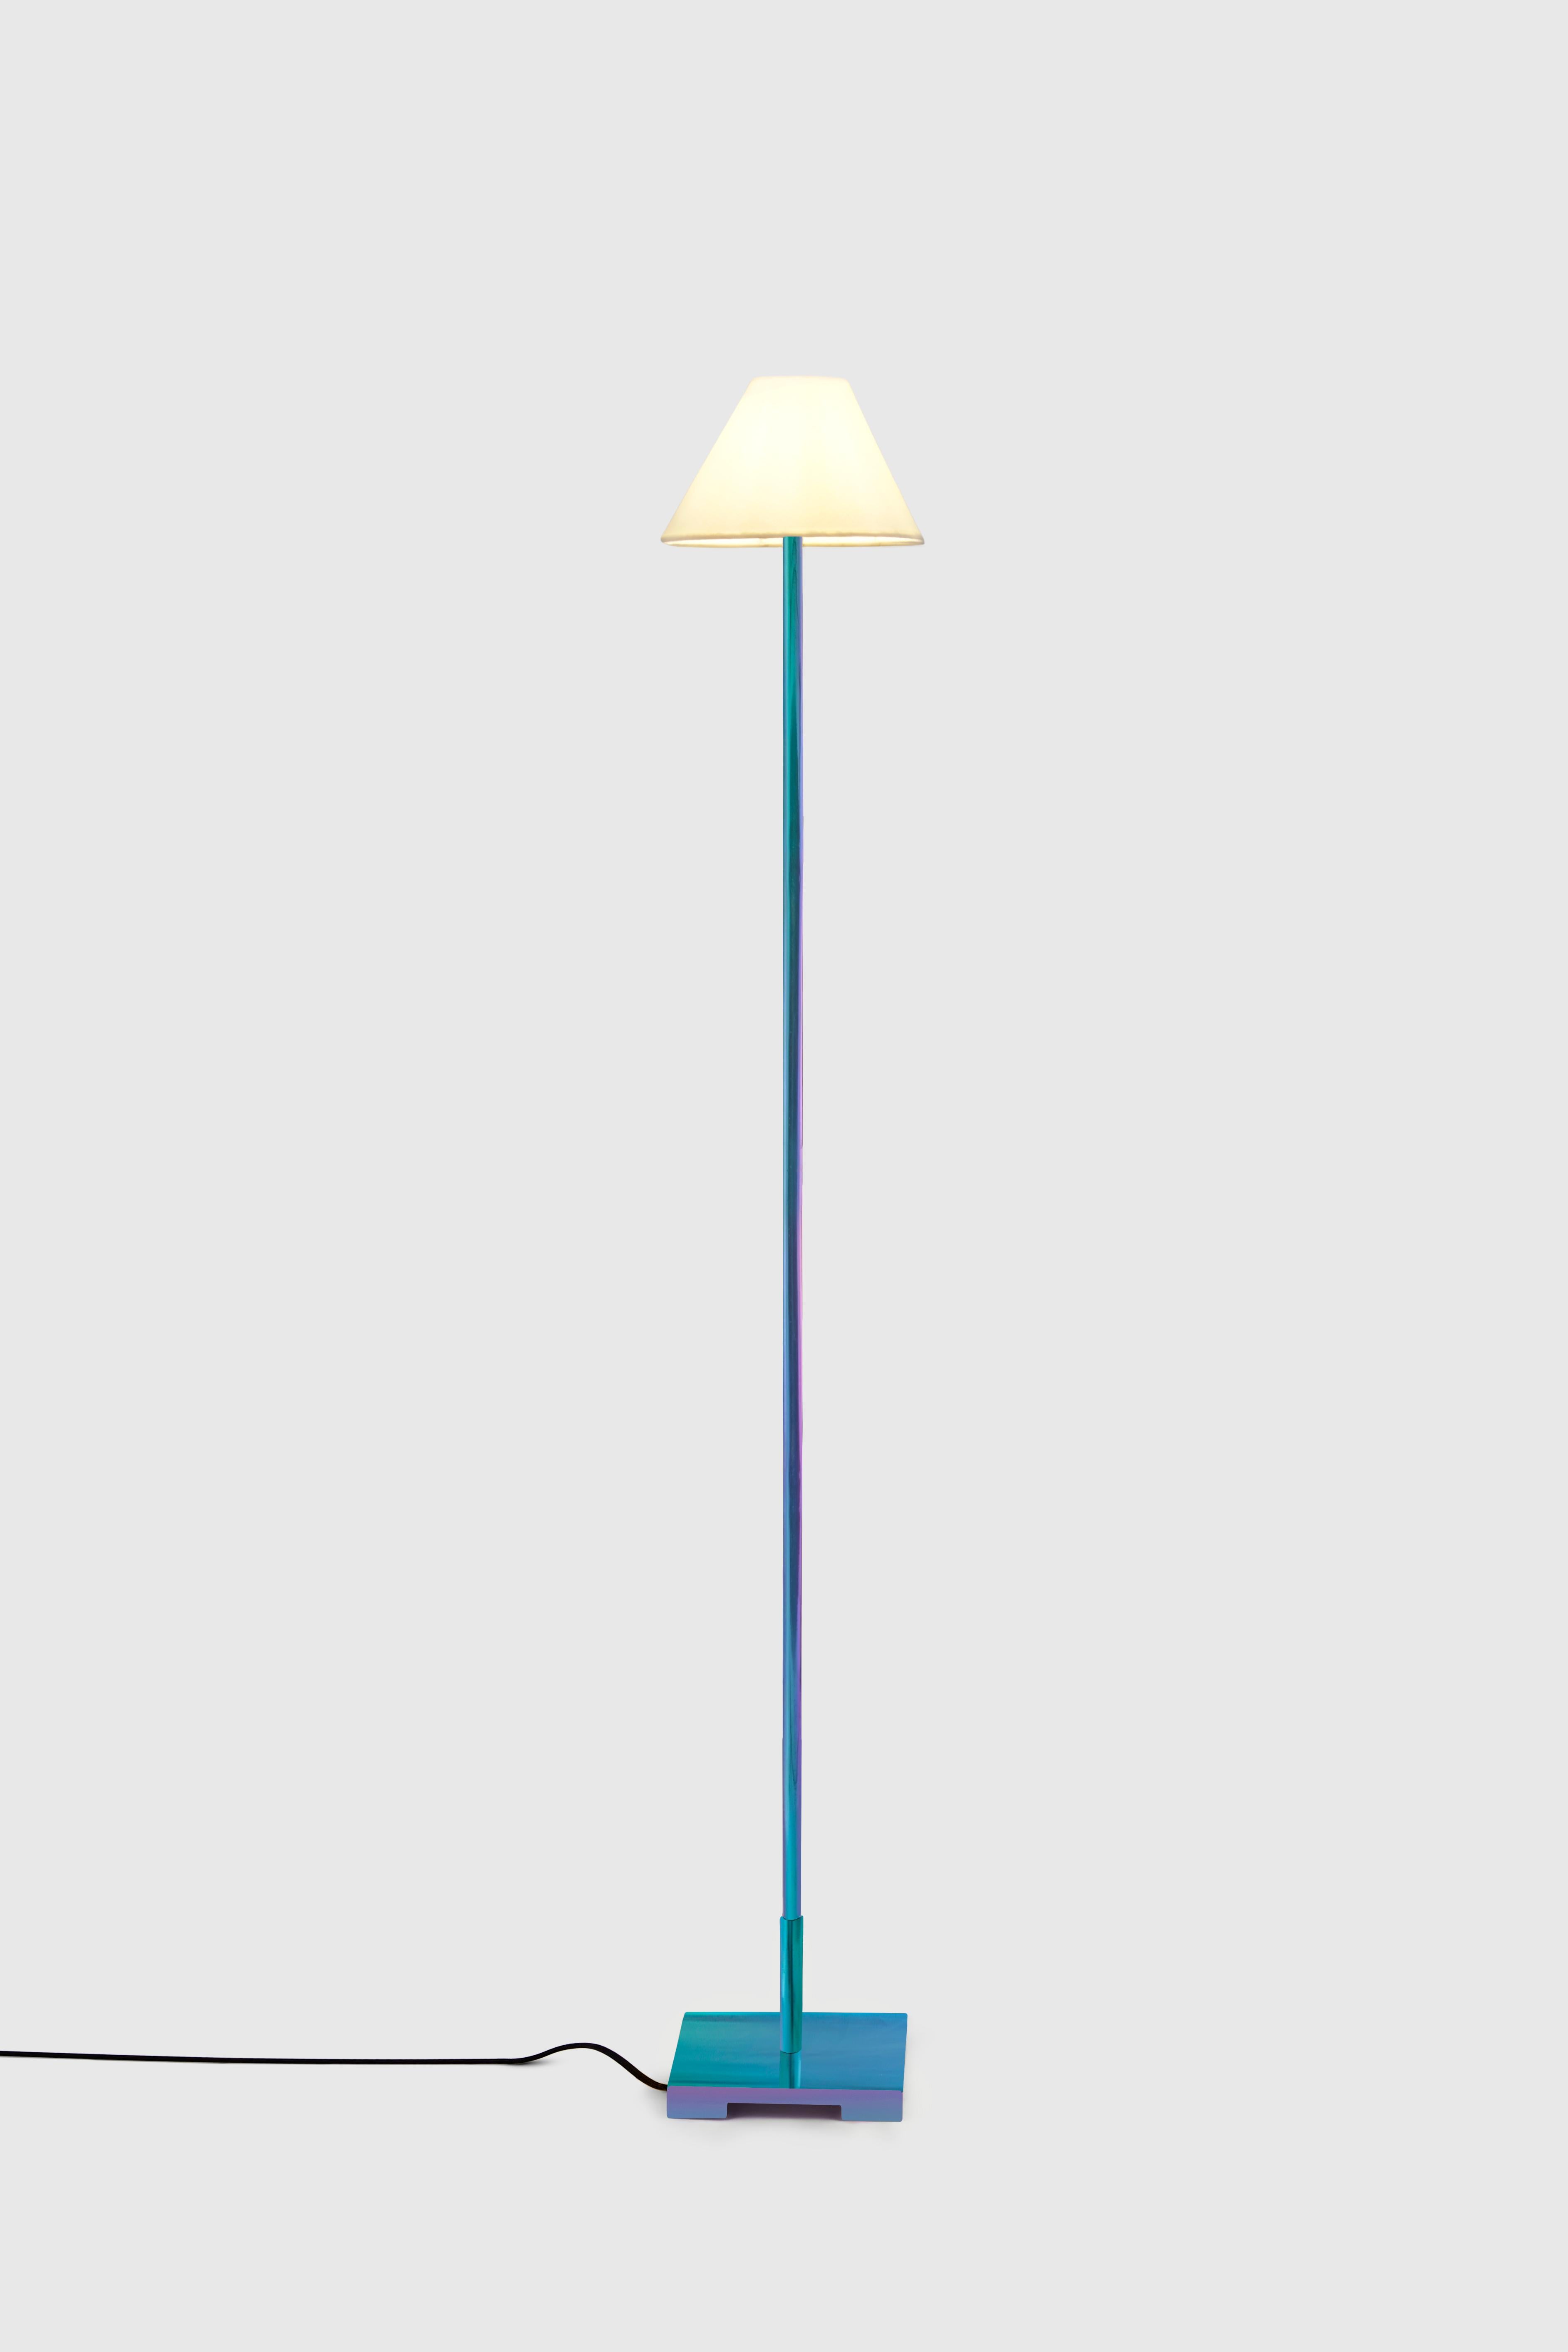 Unique rainbow floor lamp by Hatsu
Dimensions: W 30 x H 125 cm 
Materials: Plated Steel 

Hatsu is a design studio based in Mumbai that creates modern lighting that are unique and immediately recognisable. We started with an idea to make good design